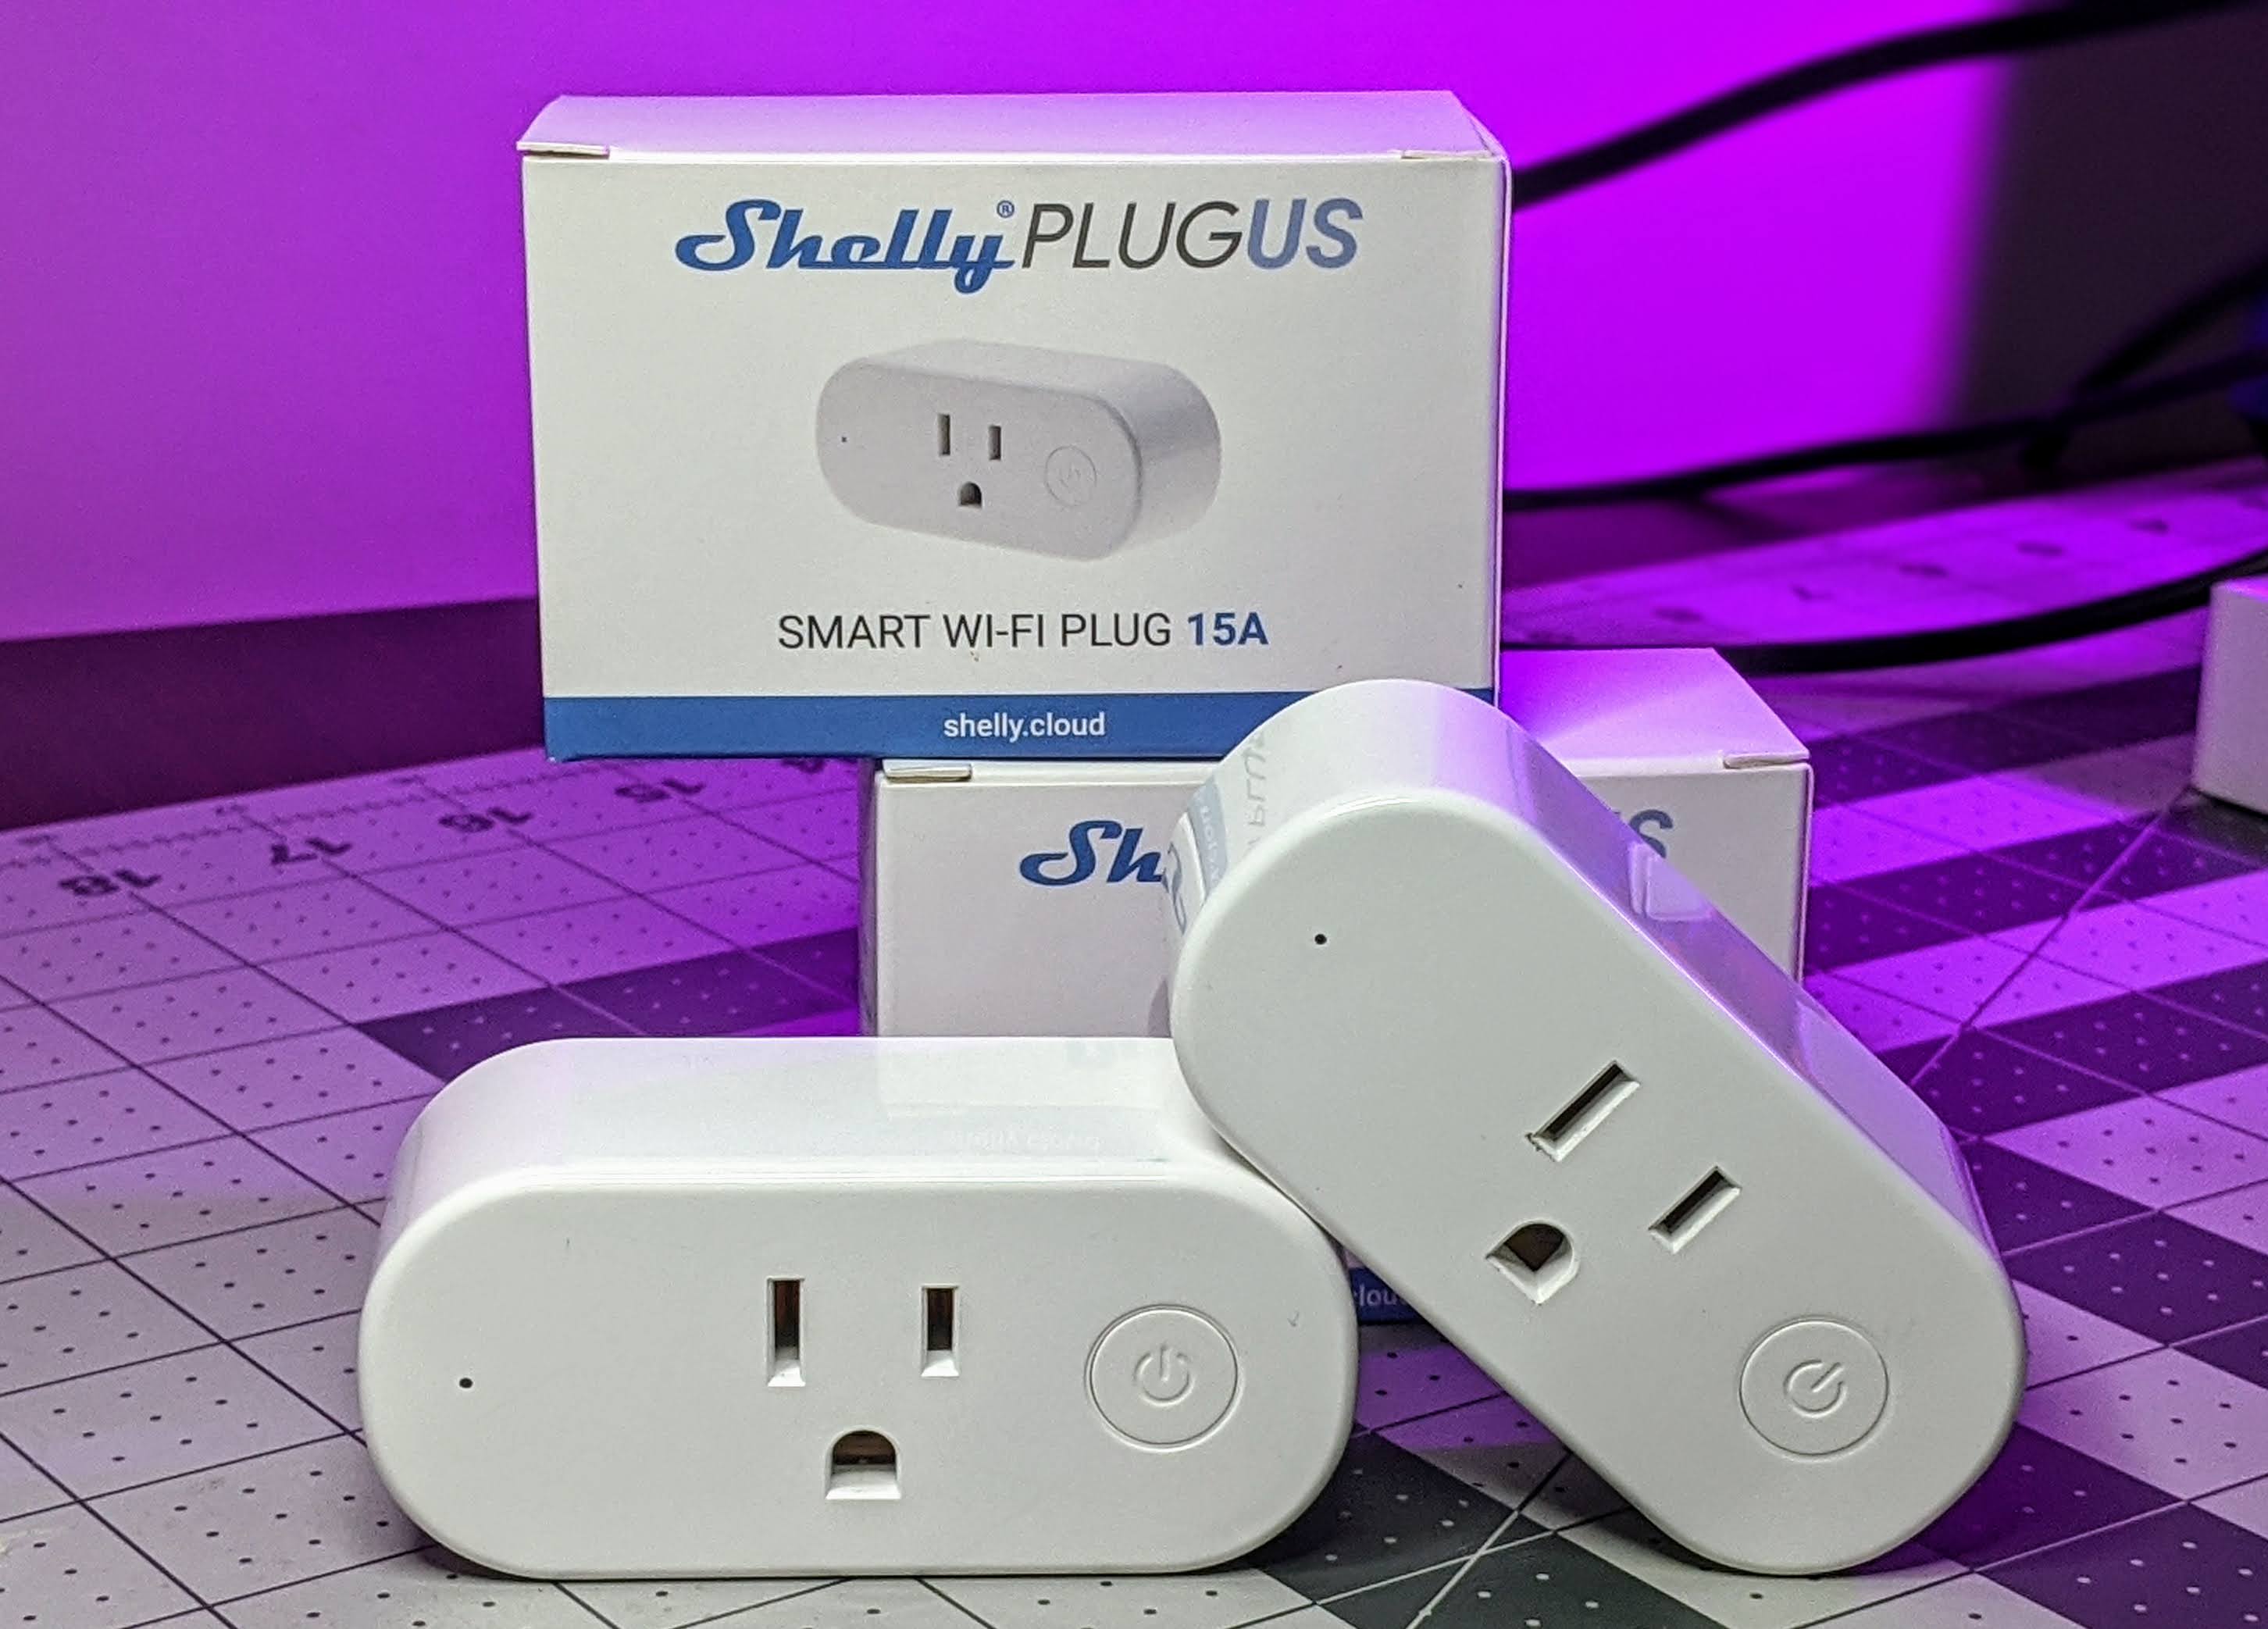 Shelly Plug US with Power Monitoring - First Look